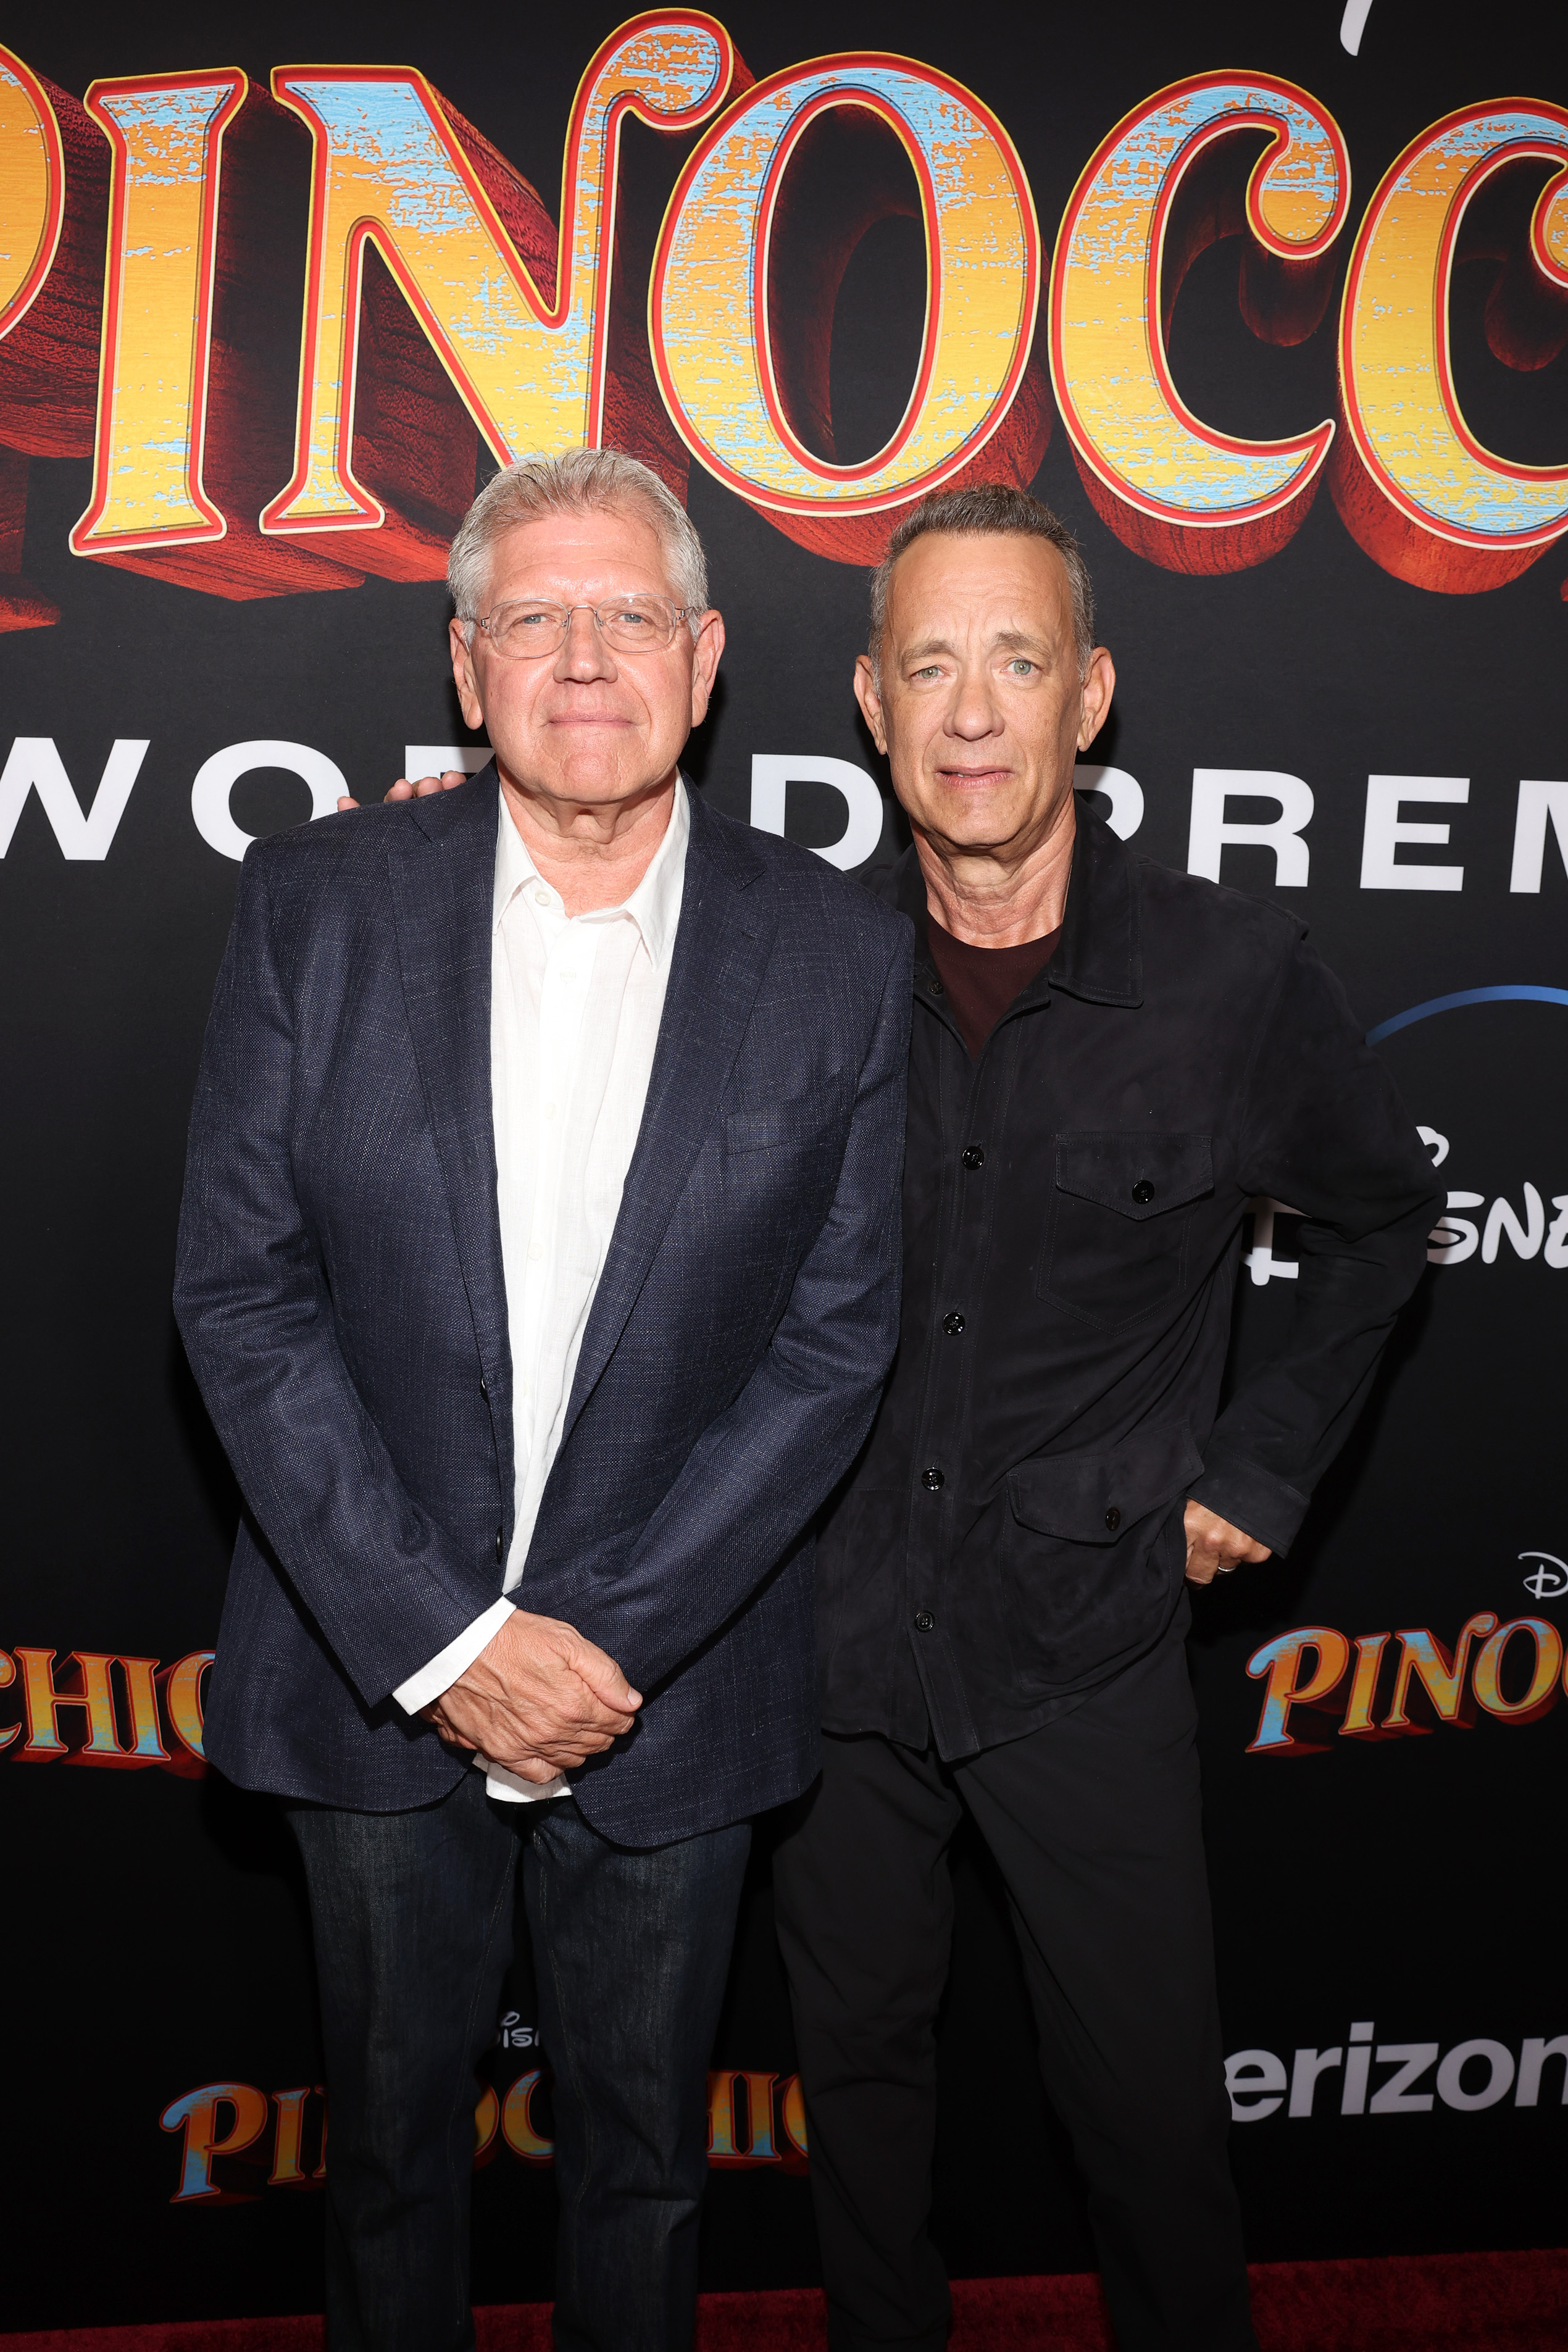 Robert Zemeckis and Tom Hanks at the "Pinocchio" world premiere in Burbank, California on September 7, 2022. | Source: Getty Images